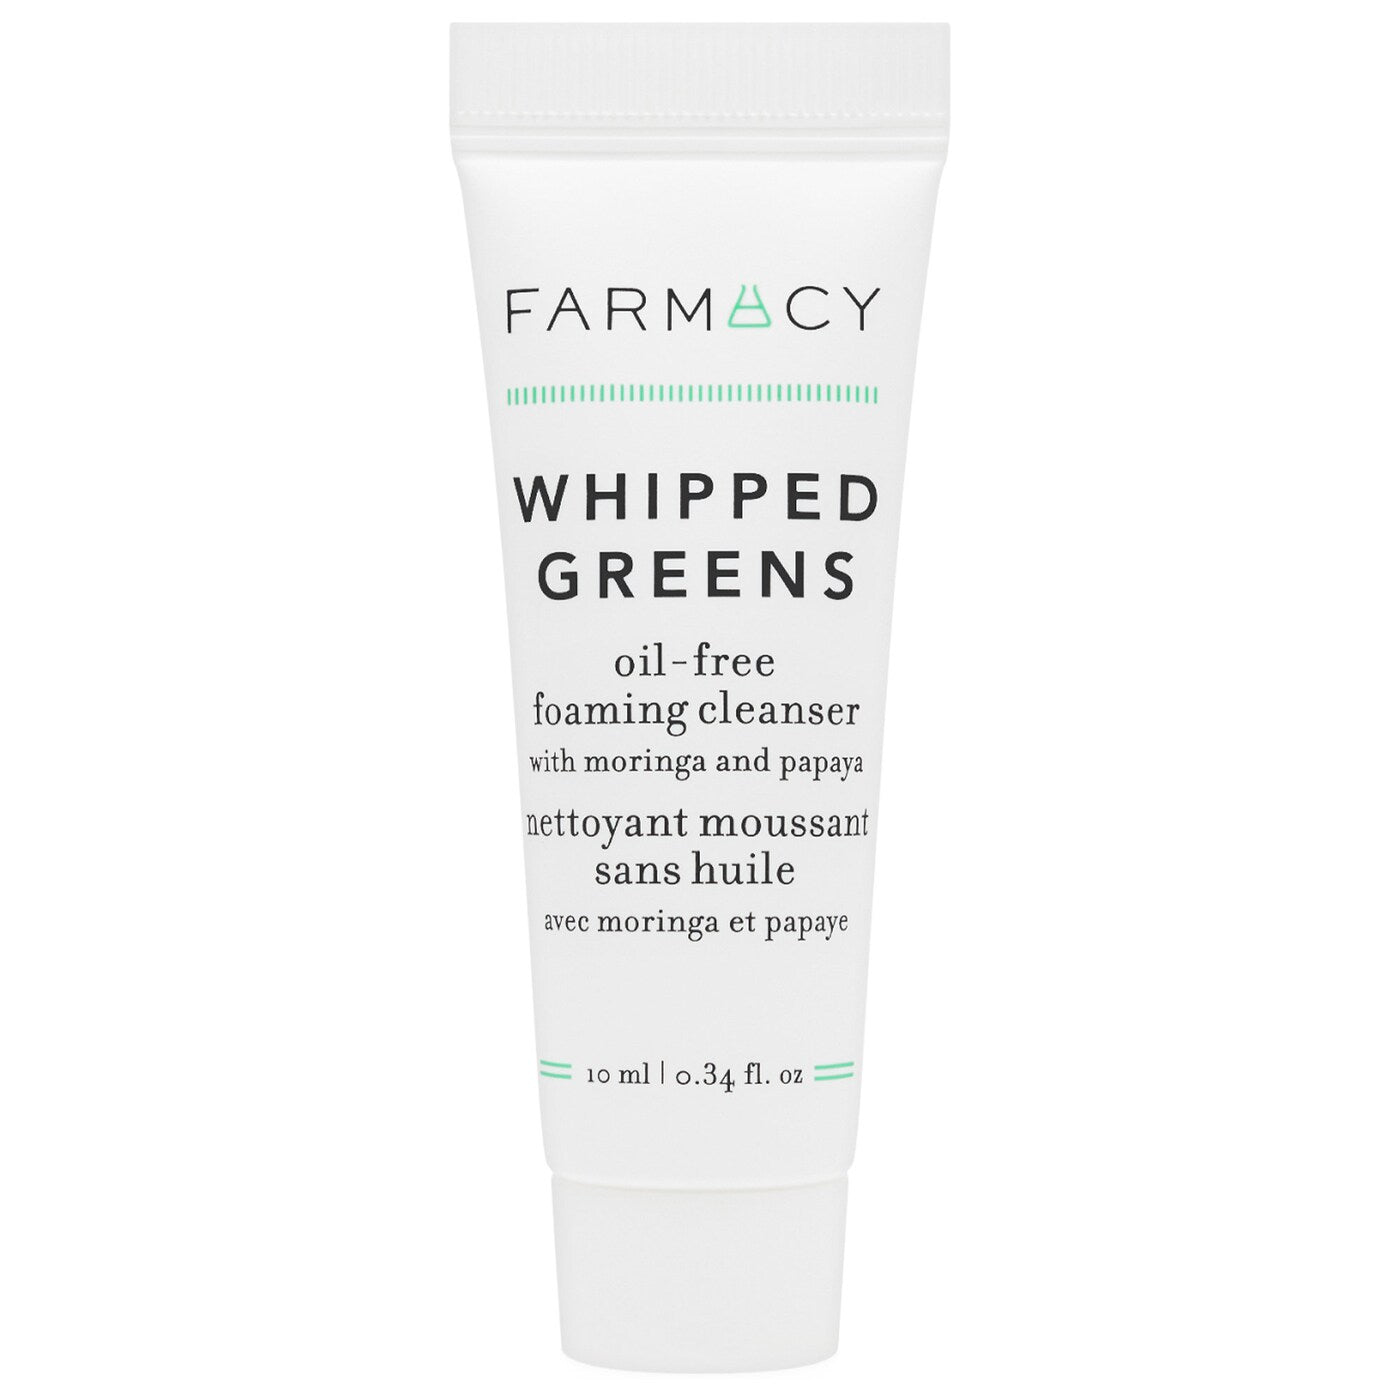 Farmacy Whipped Greens Oil-free Foaming Cleanser trial size